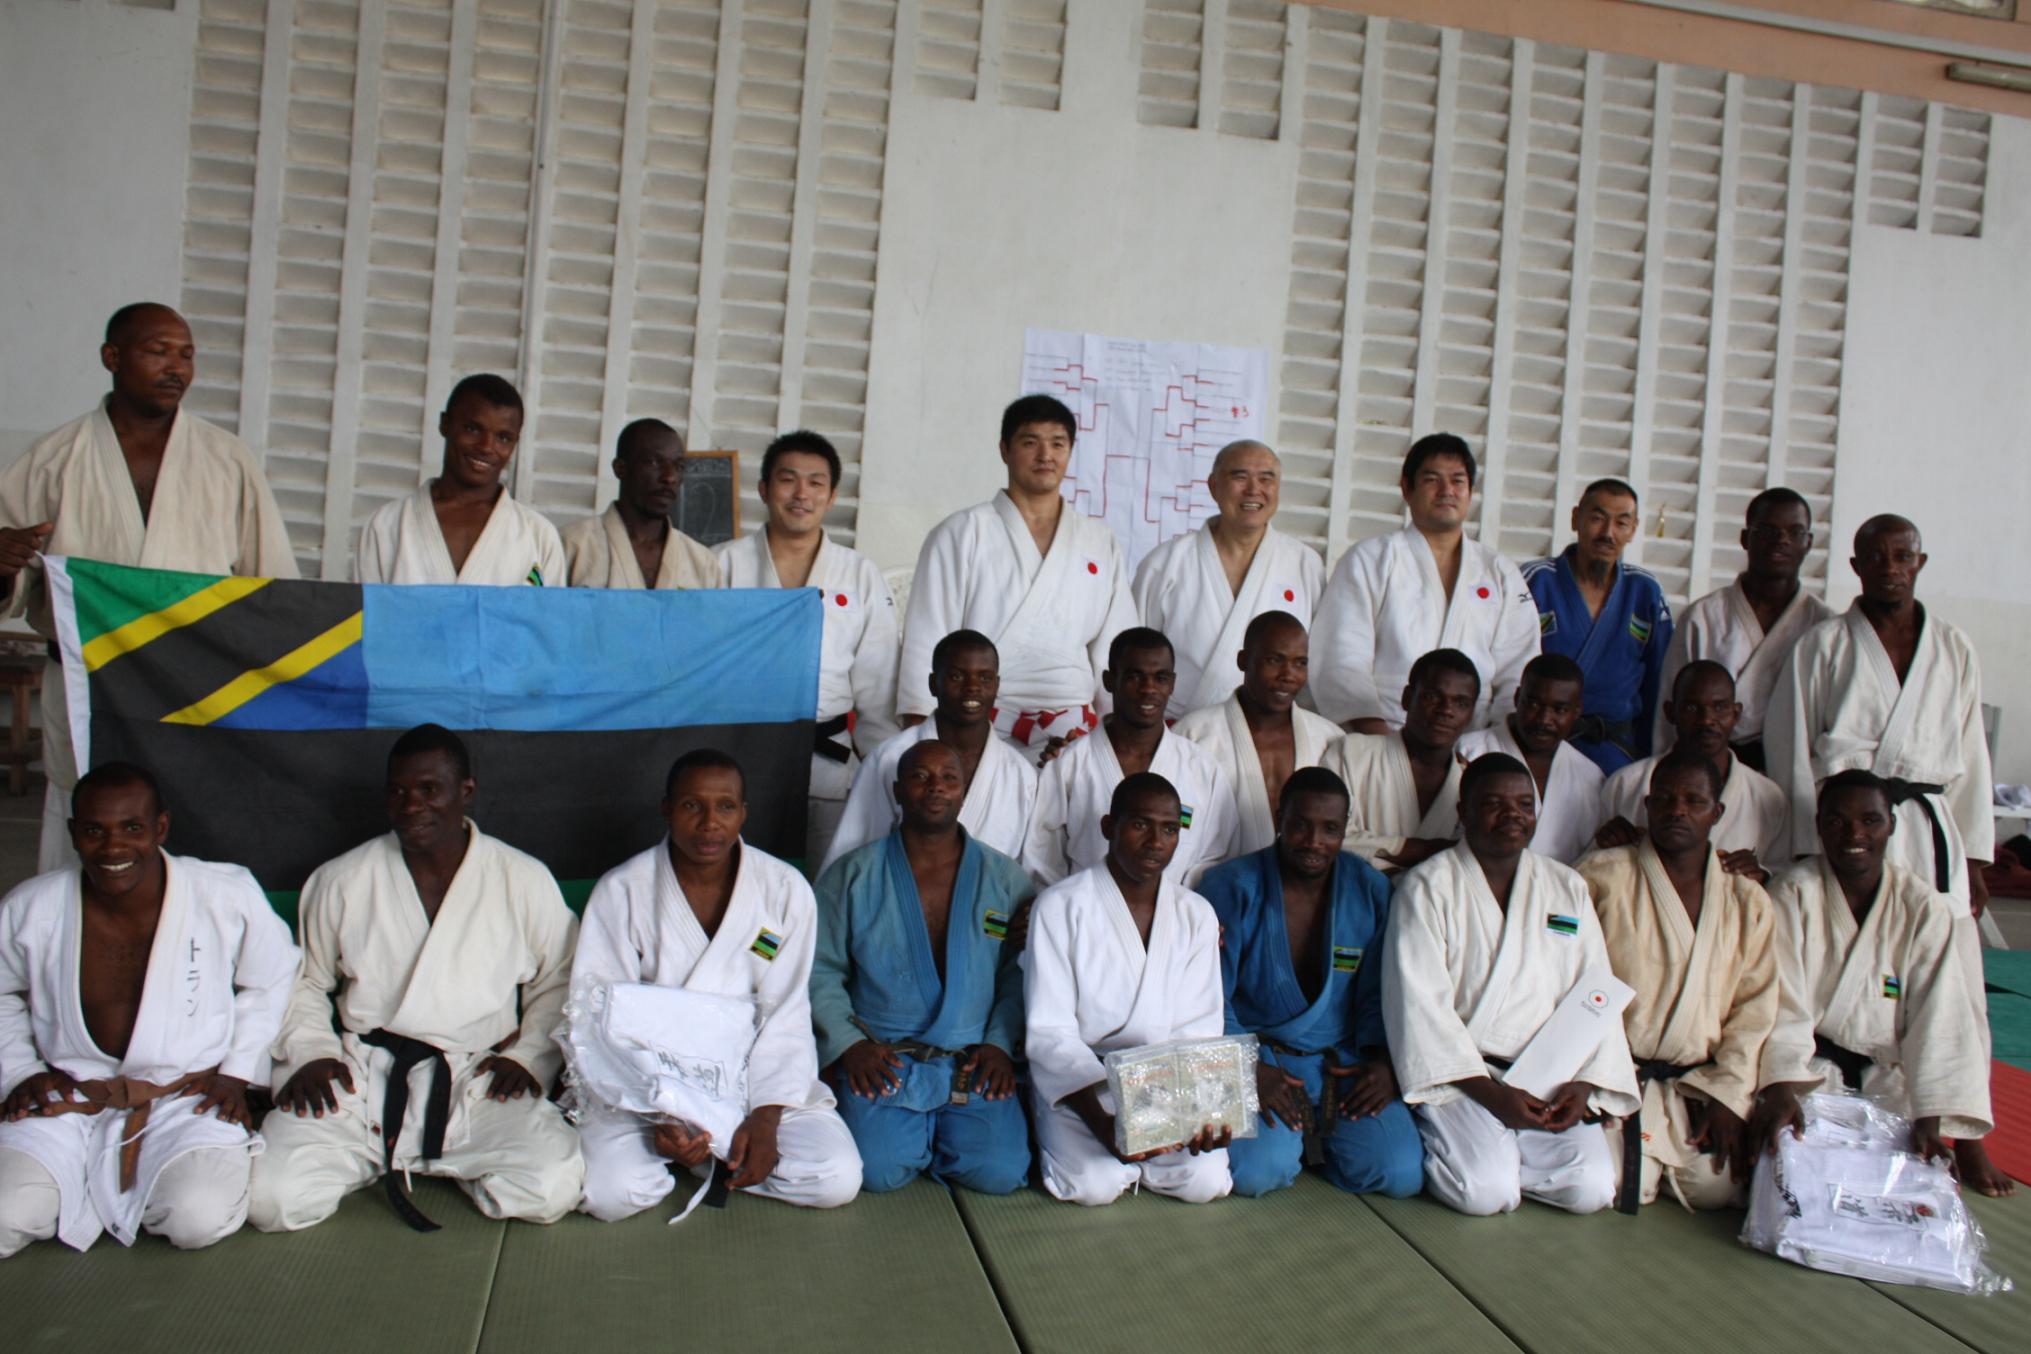 4 JUDO EXPERTS FROM JAPAN ~柔道使節団のタンザニア来訪_a0088841_1551075.jpg